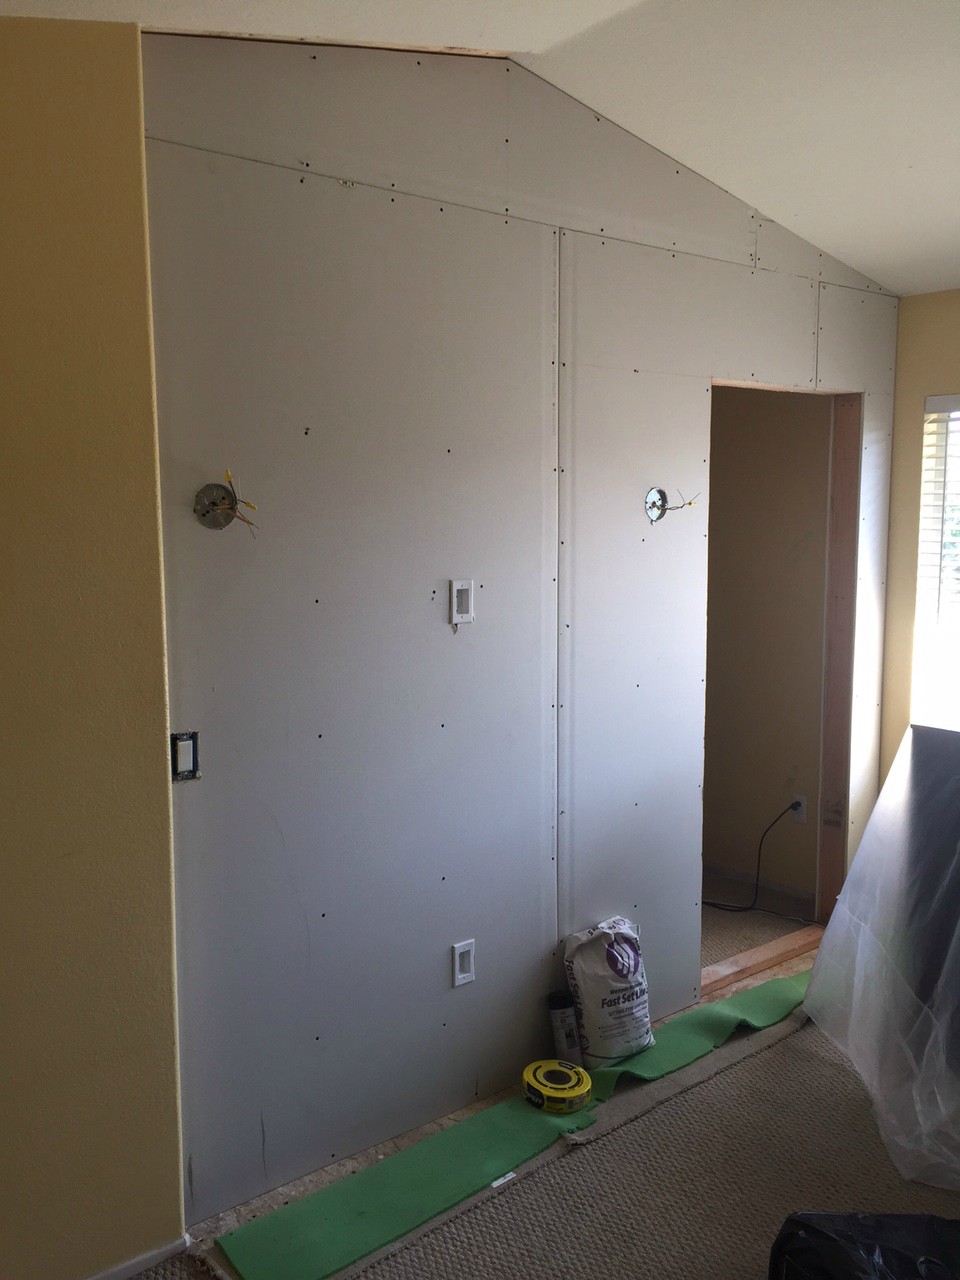 Cover the plywood up with dry wall. Don't for get about the electrical!